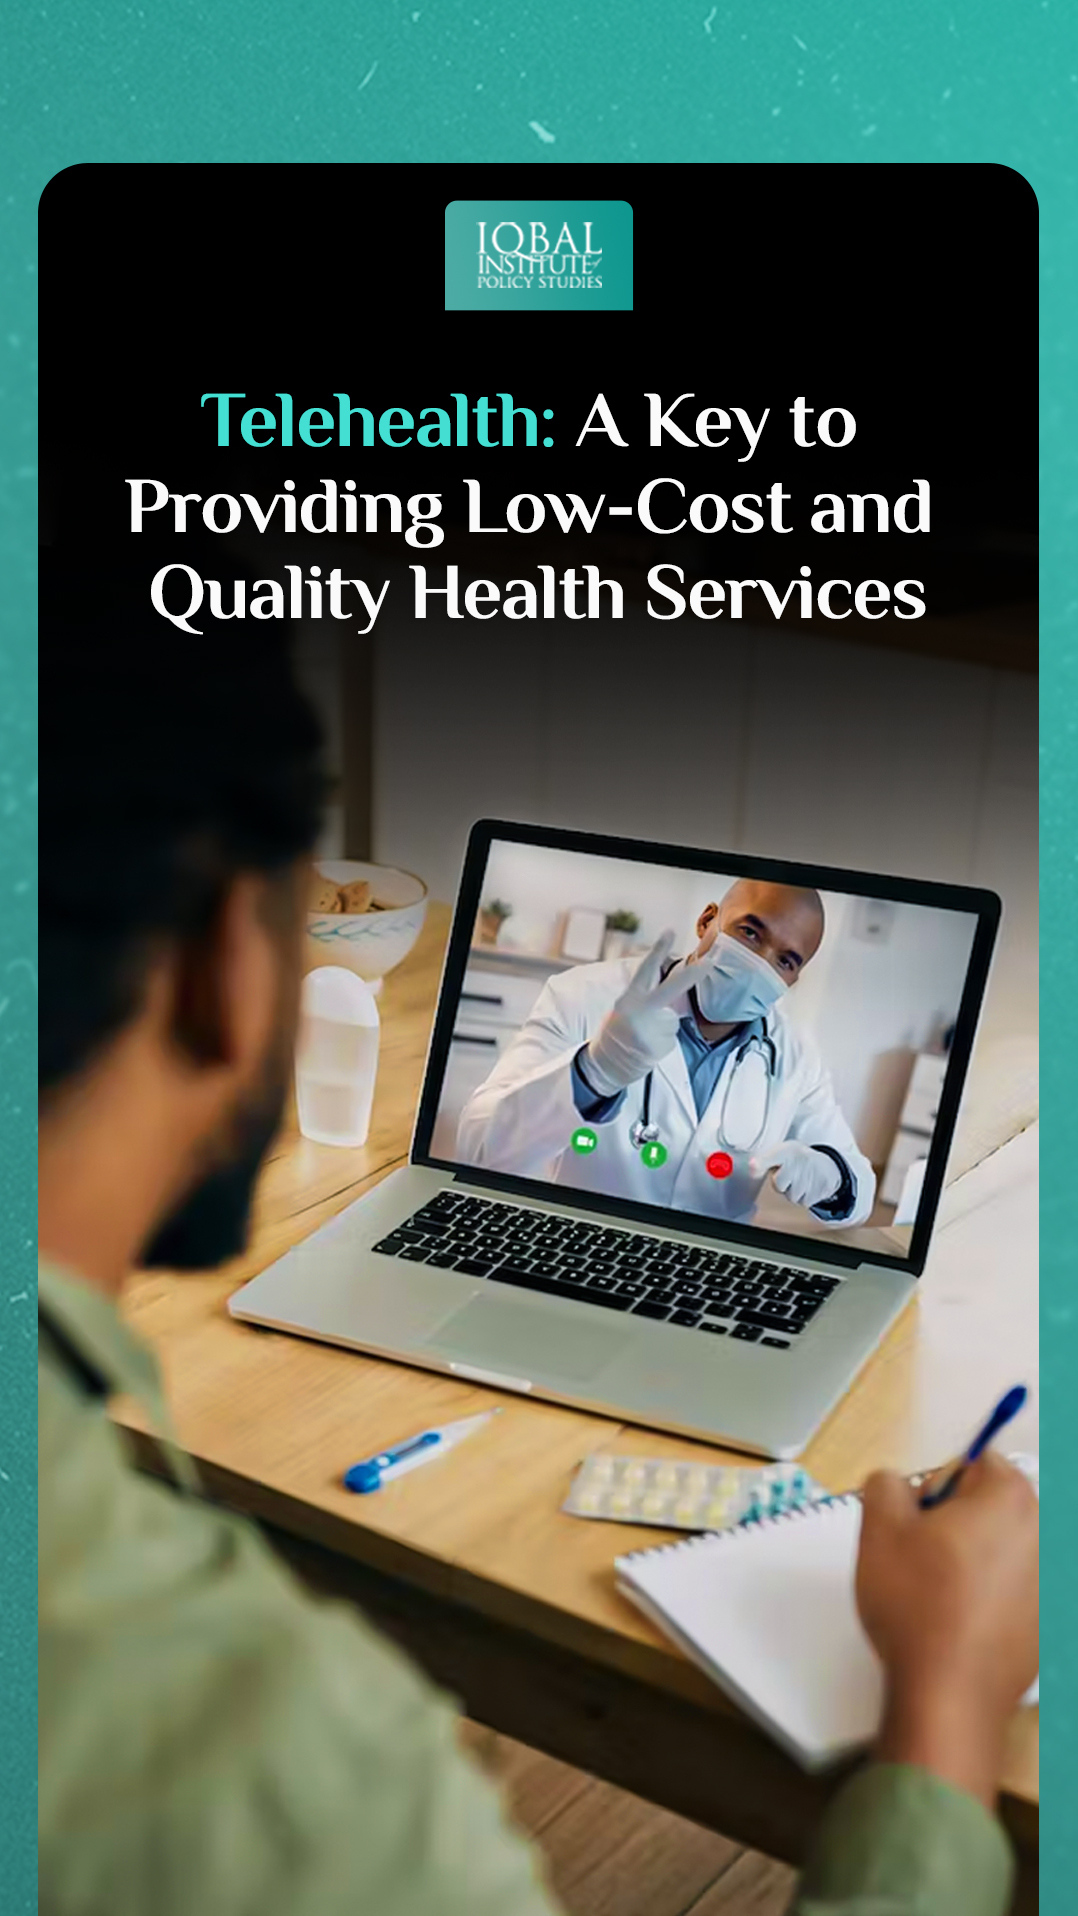 Telehealth: A key to providing low-cost and quality health services to the masses